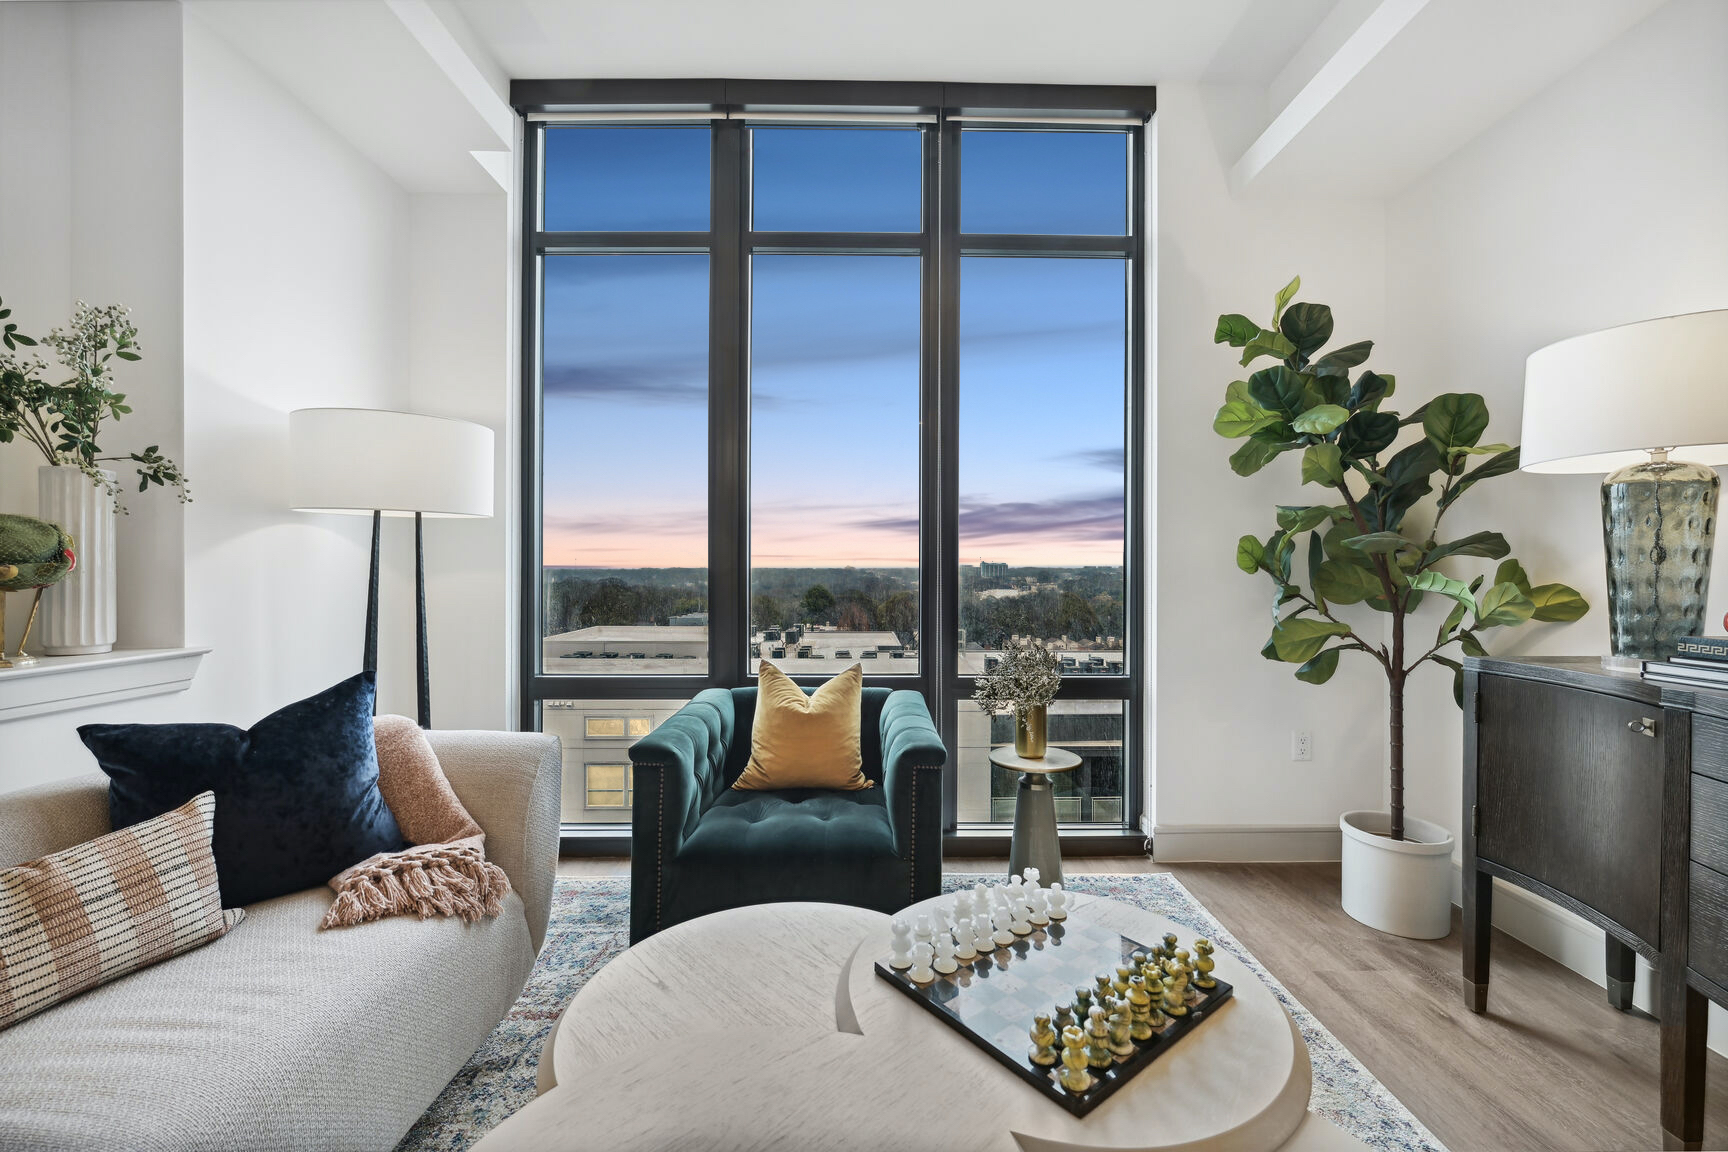 Living Room with floor to ceiling windows at sunset overlooking Atlanta at The Hadley